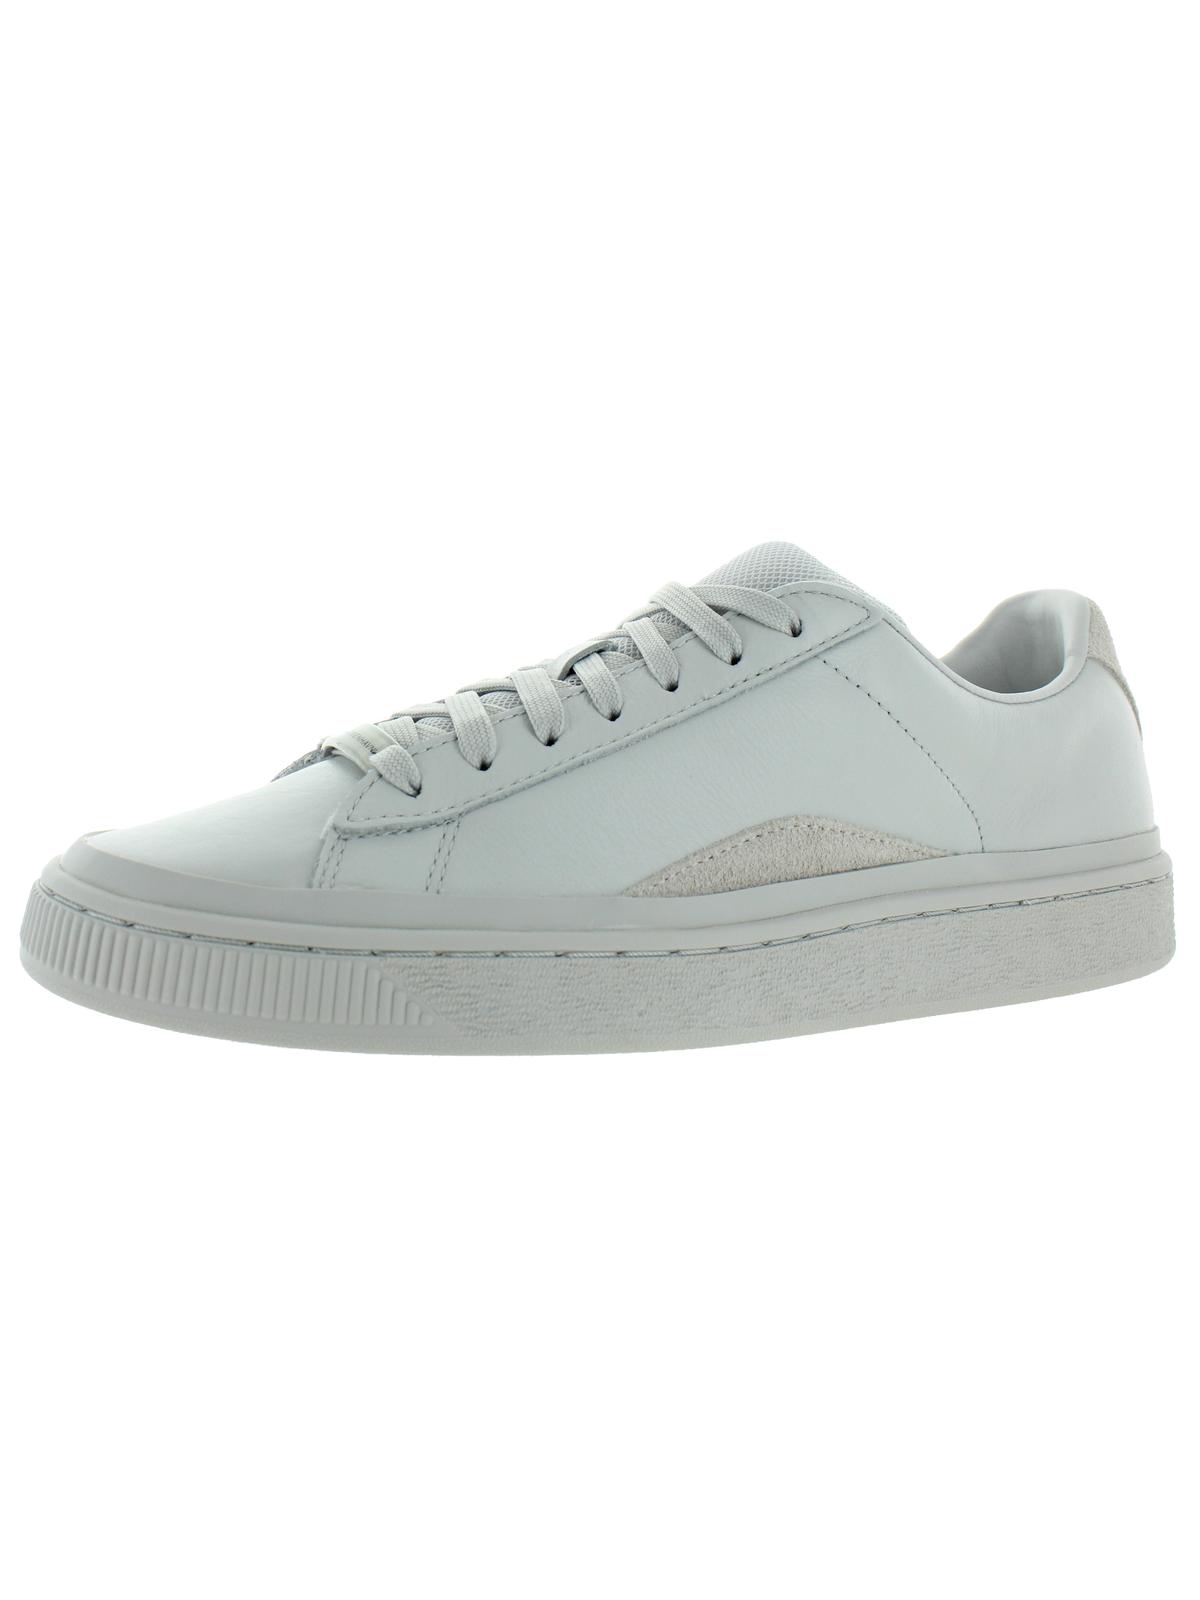 Puma Mens Basket HAN Lace up Solid Casual Shoes - image 1 of 2